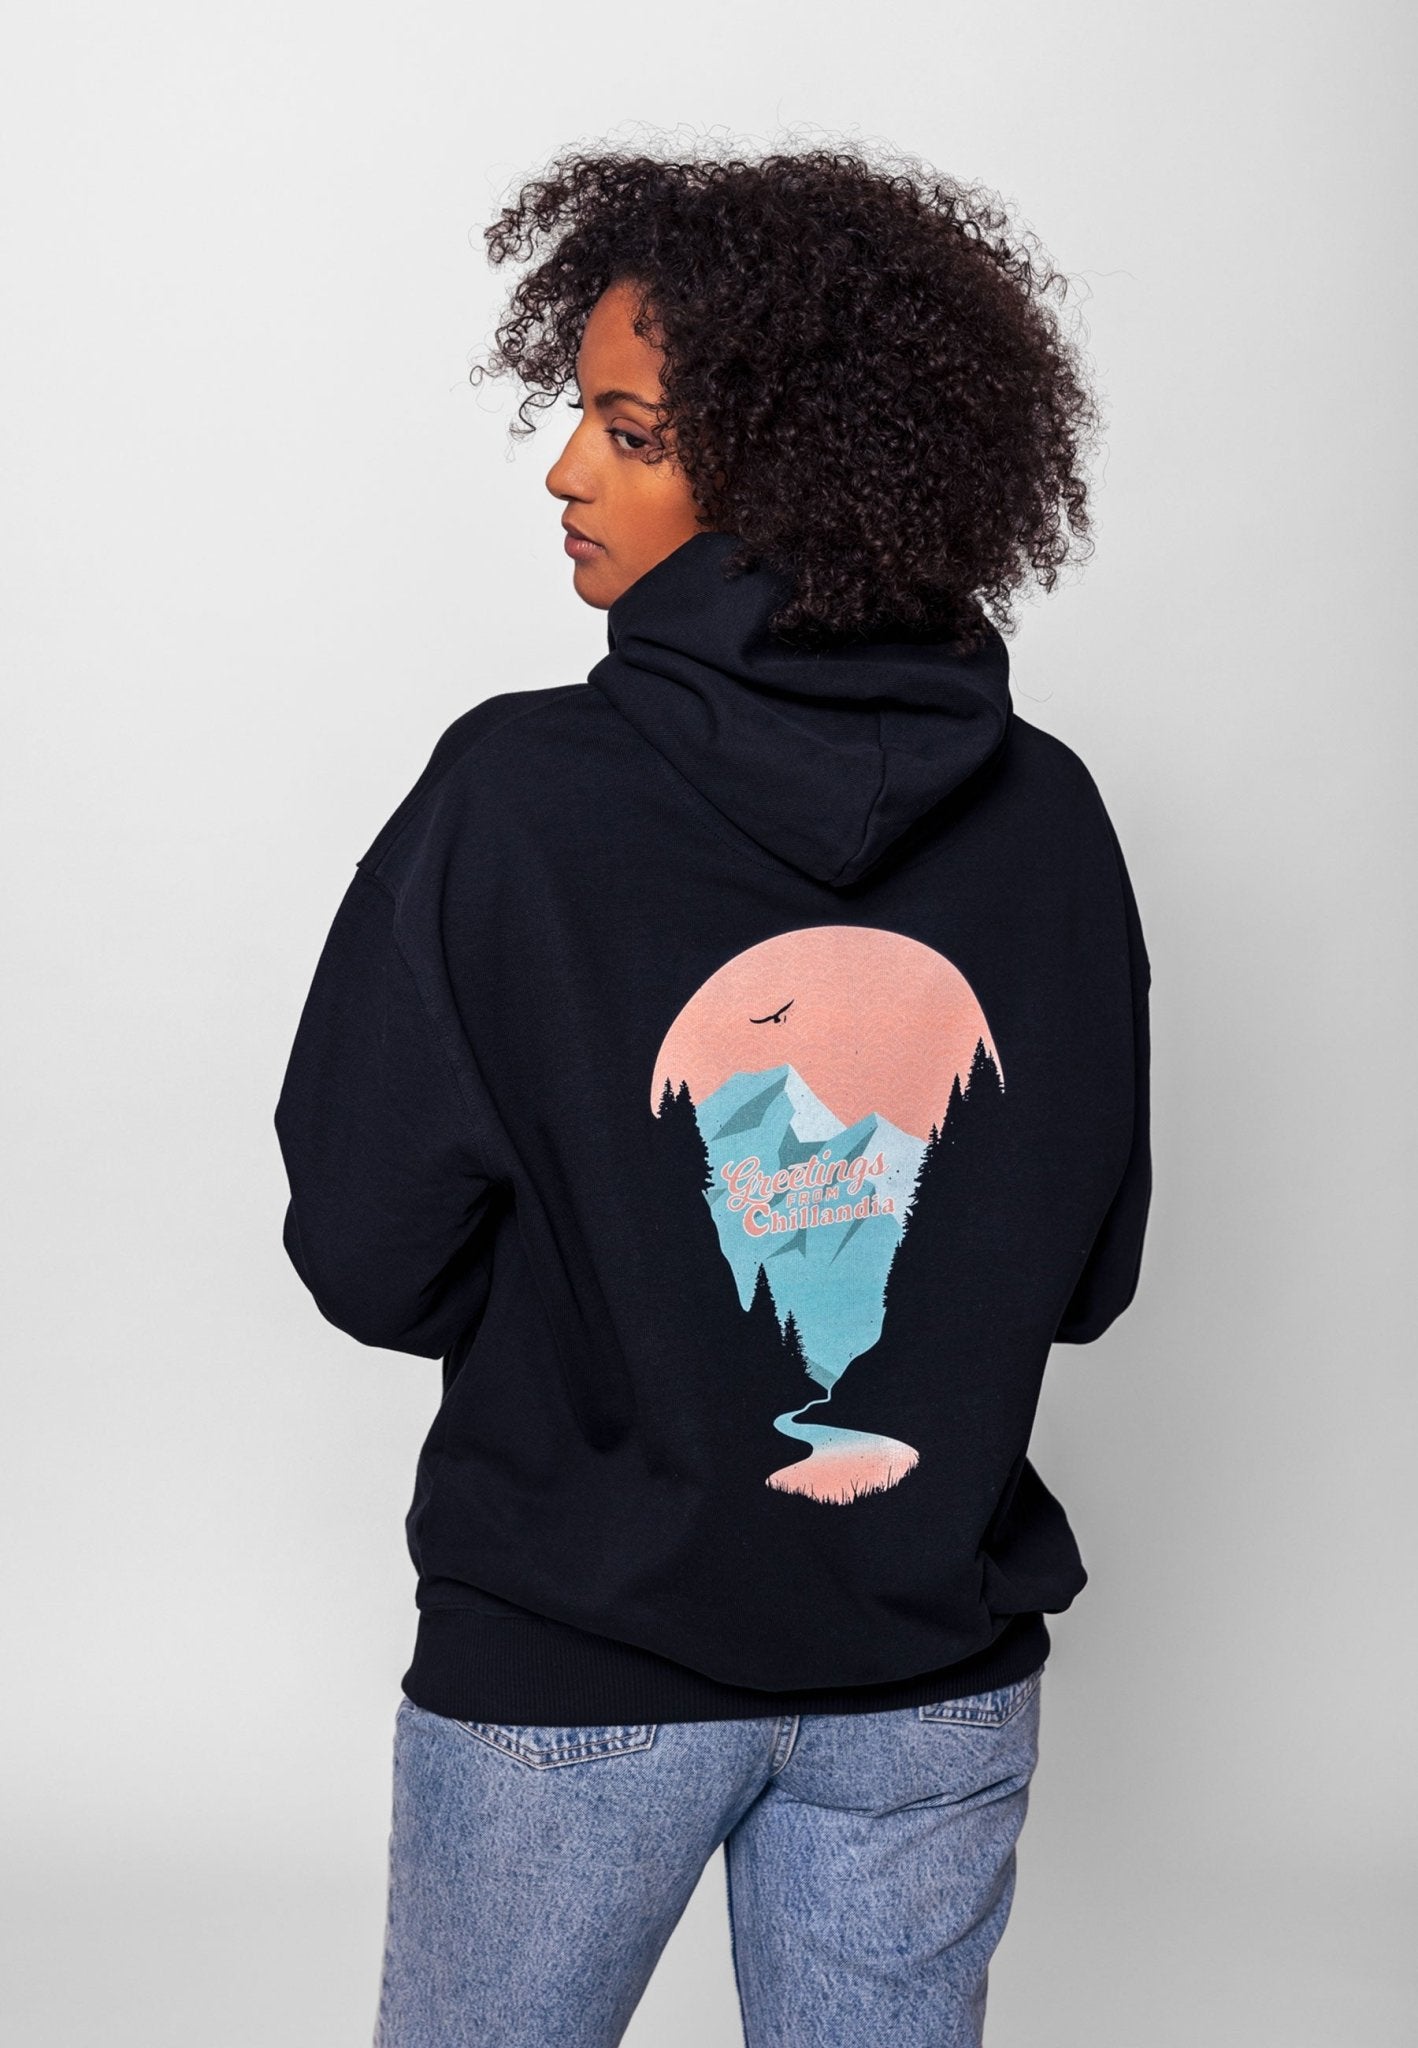 Oversized Hoodie Chillandia - wise enough